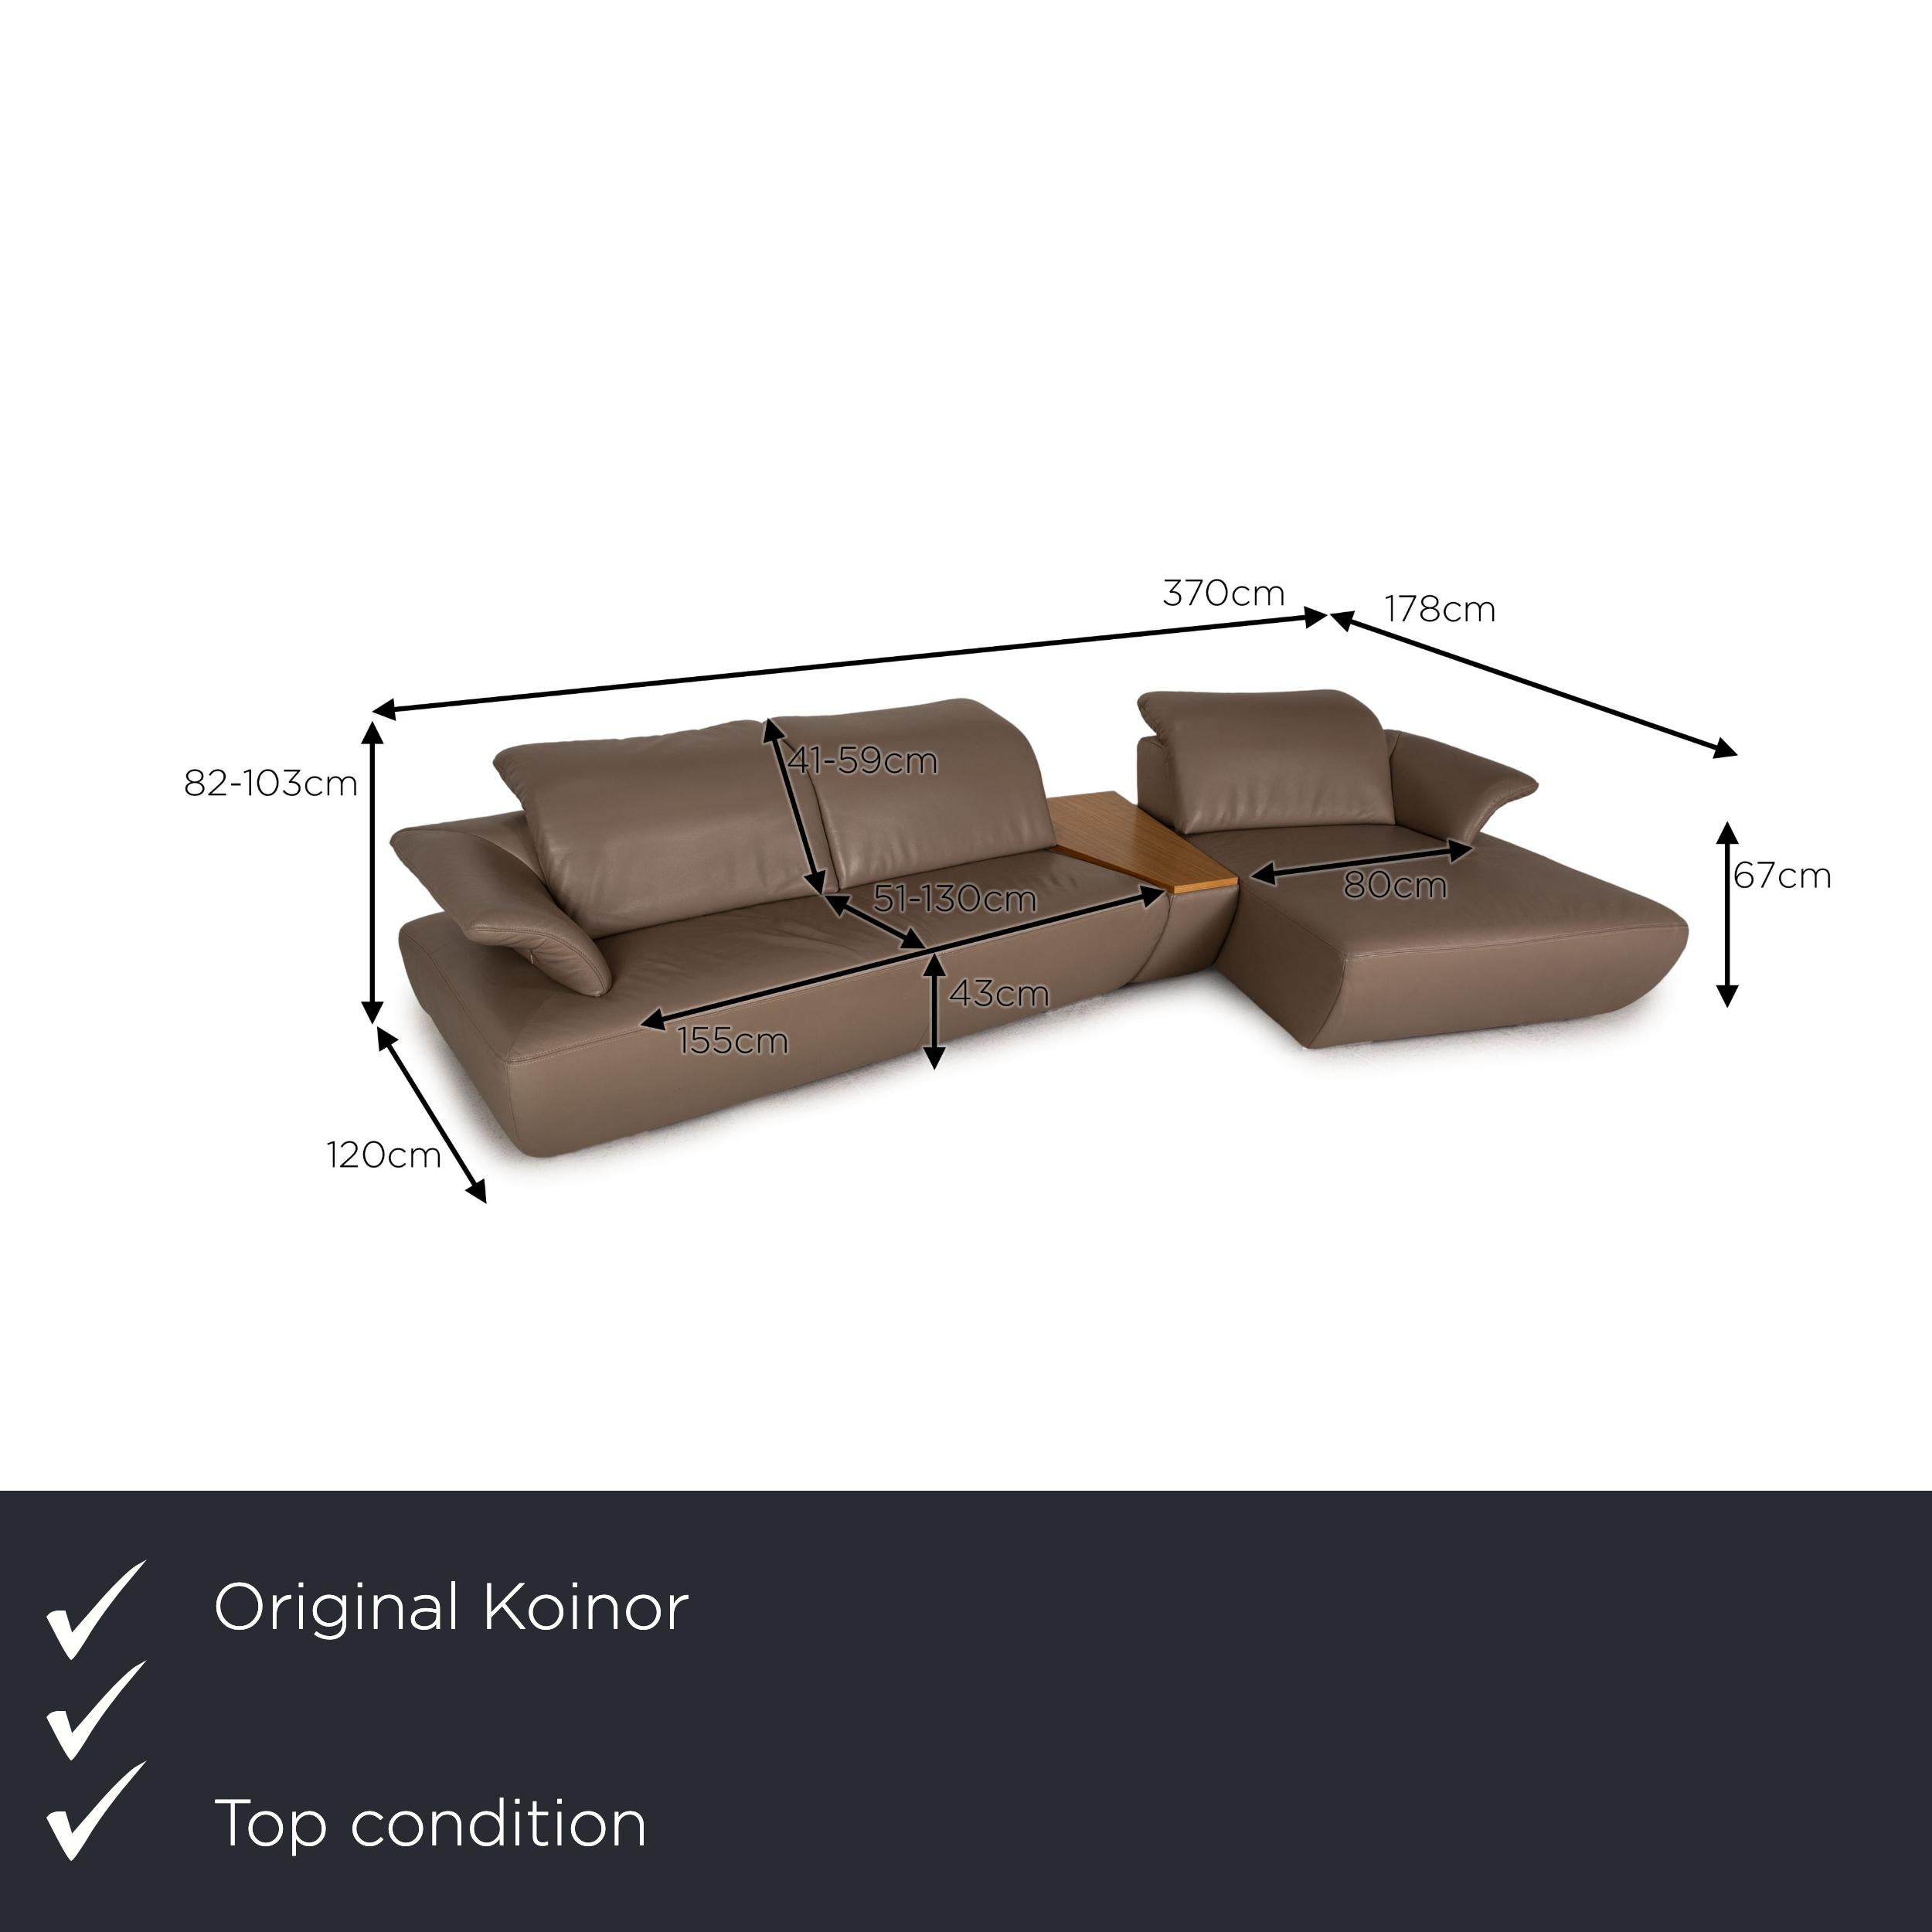 We present to you a Koinor Avanti leather sofa beige corner sofa couch function.

Product measurements in centimeters:

depth: 120
width: 370
height: 82
seat height: 43
rest height: 67
seat depth: 51
seat width: 155
back height: 41.

 